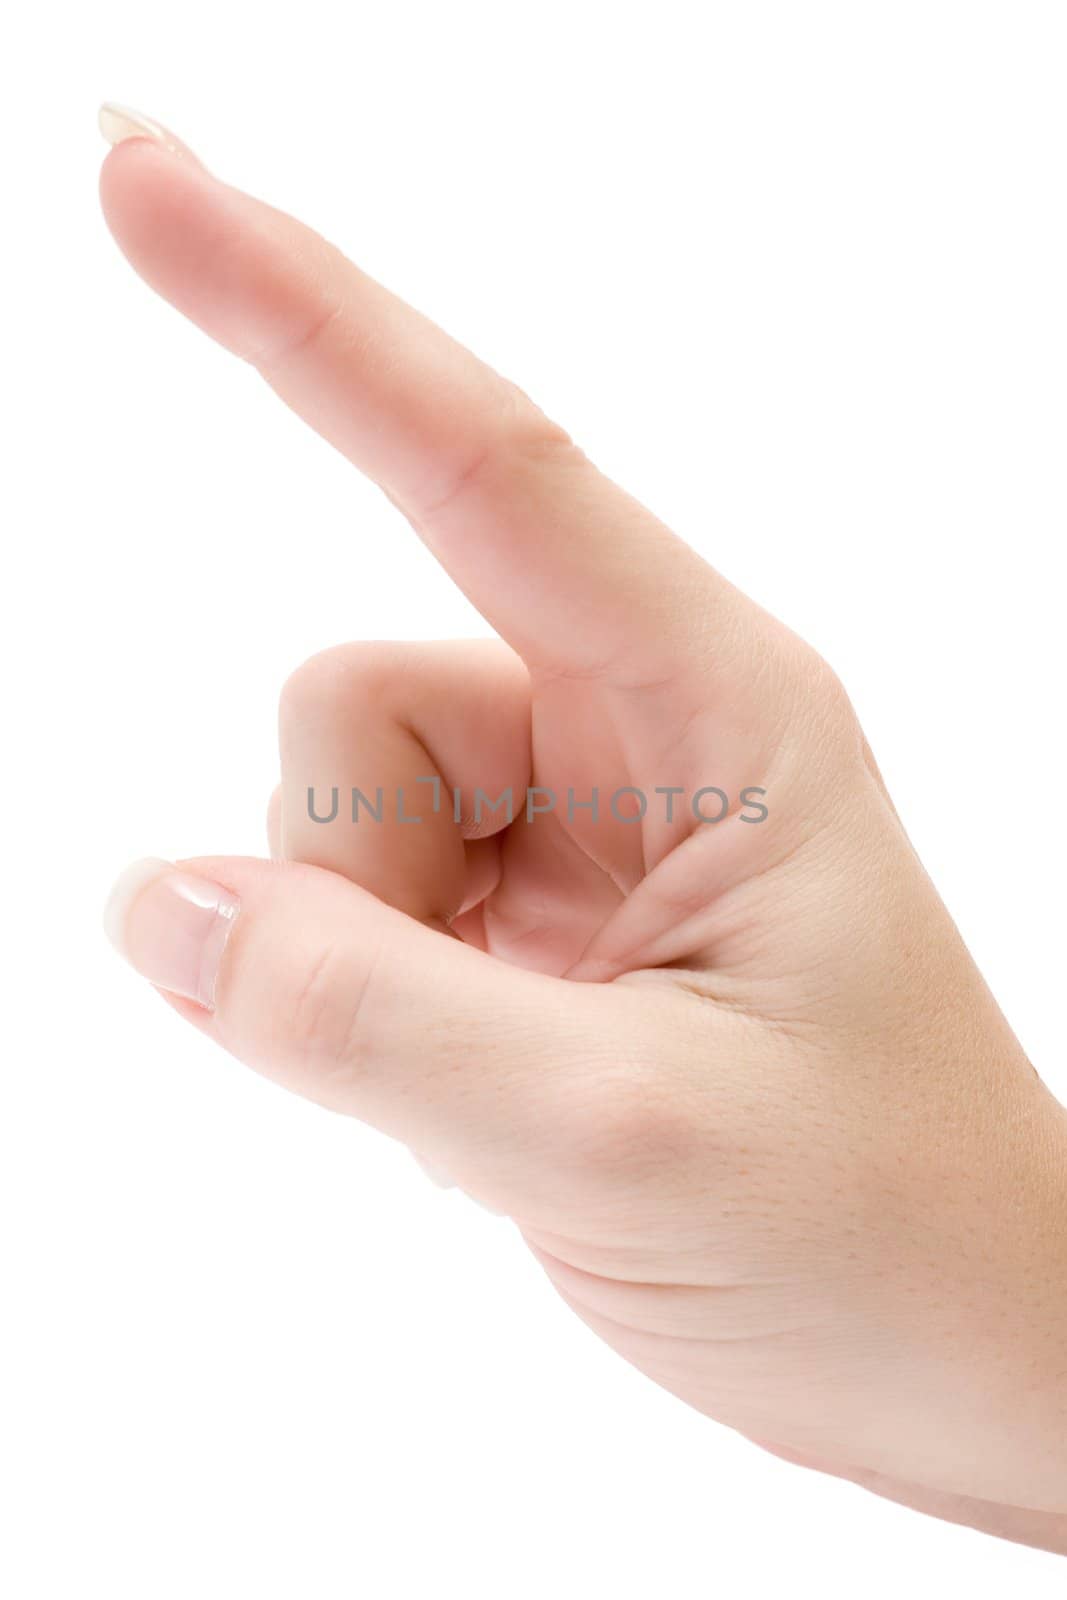 Female indexfinger pointing up. Isolated on a white background.